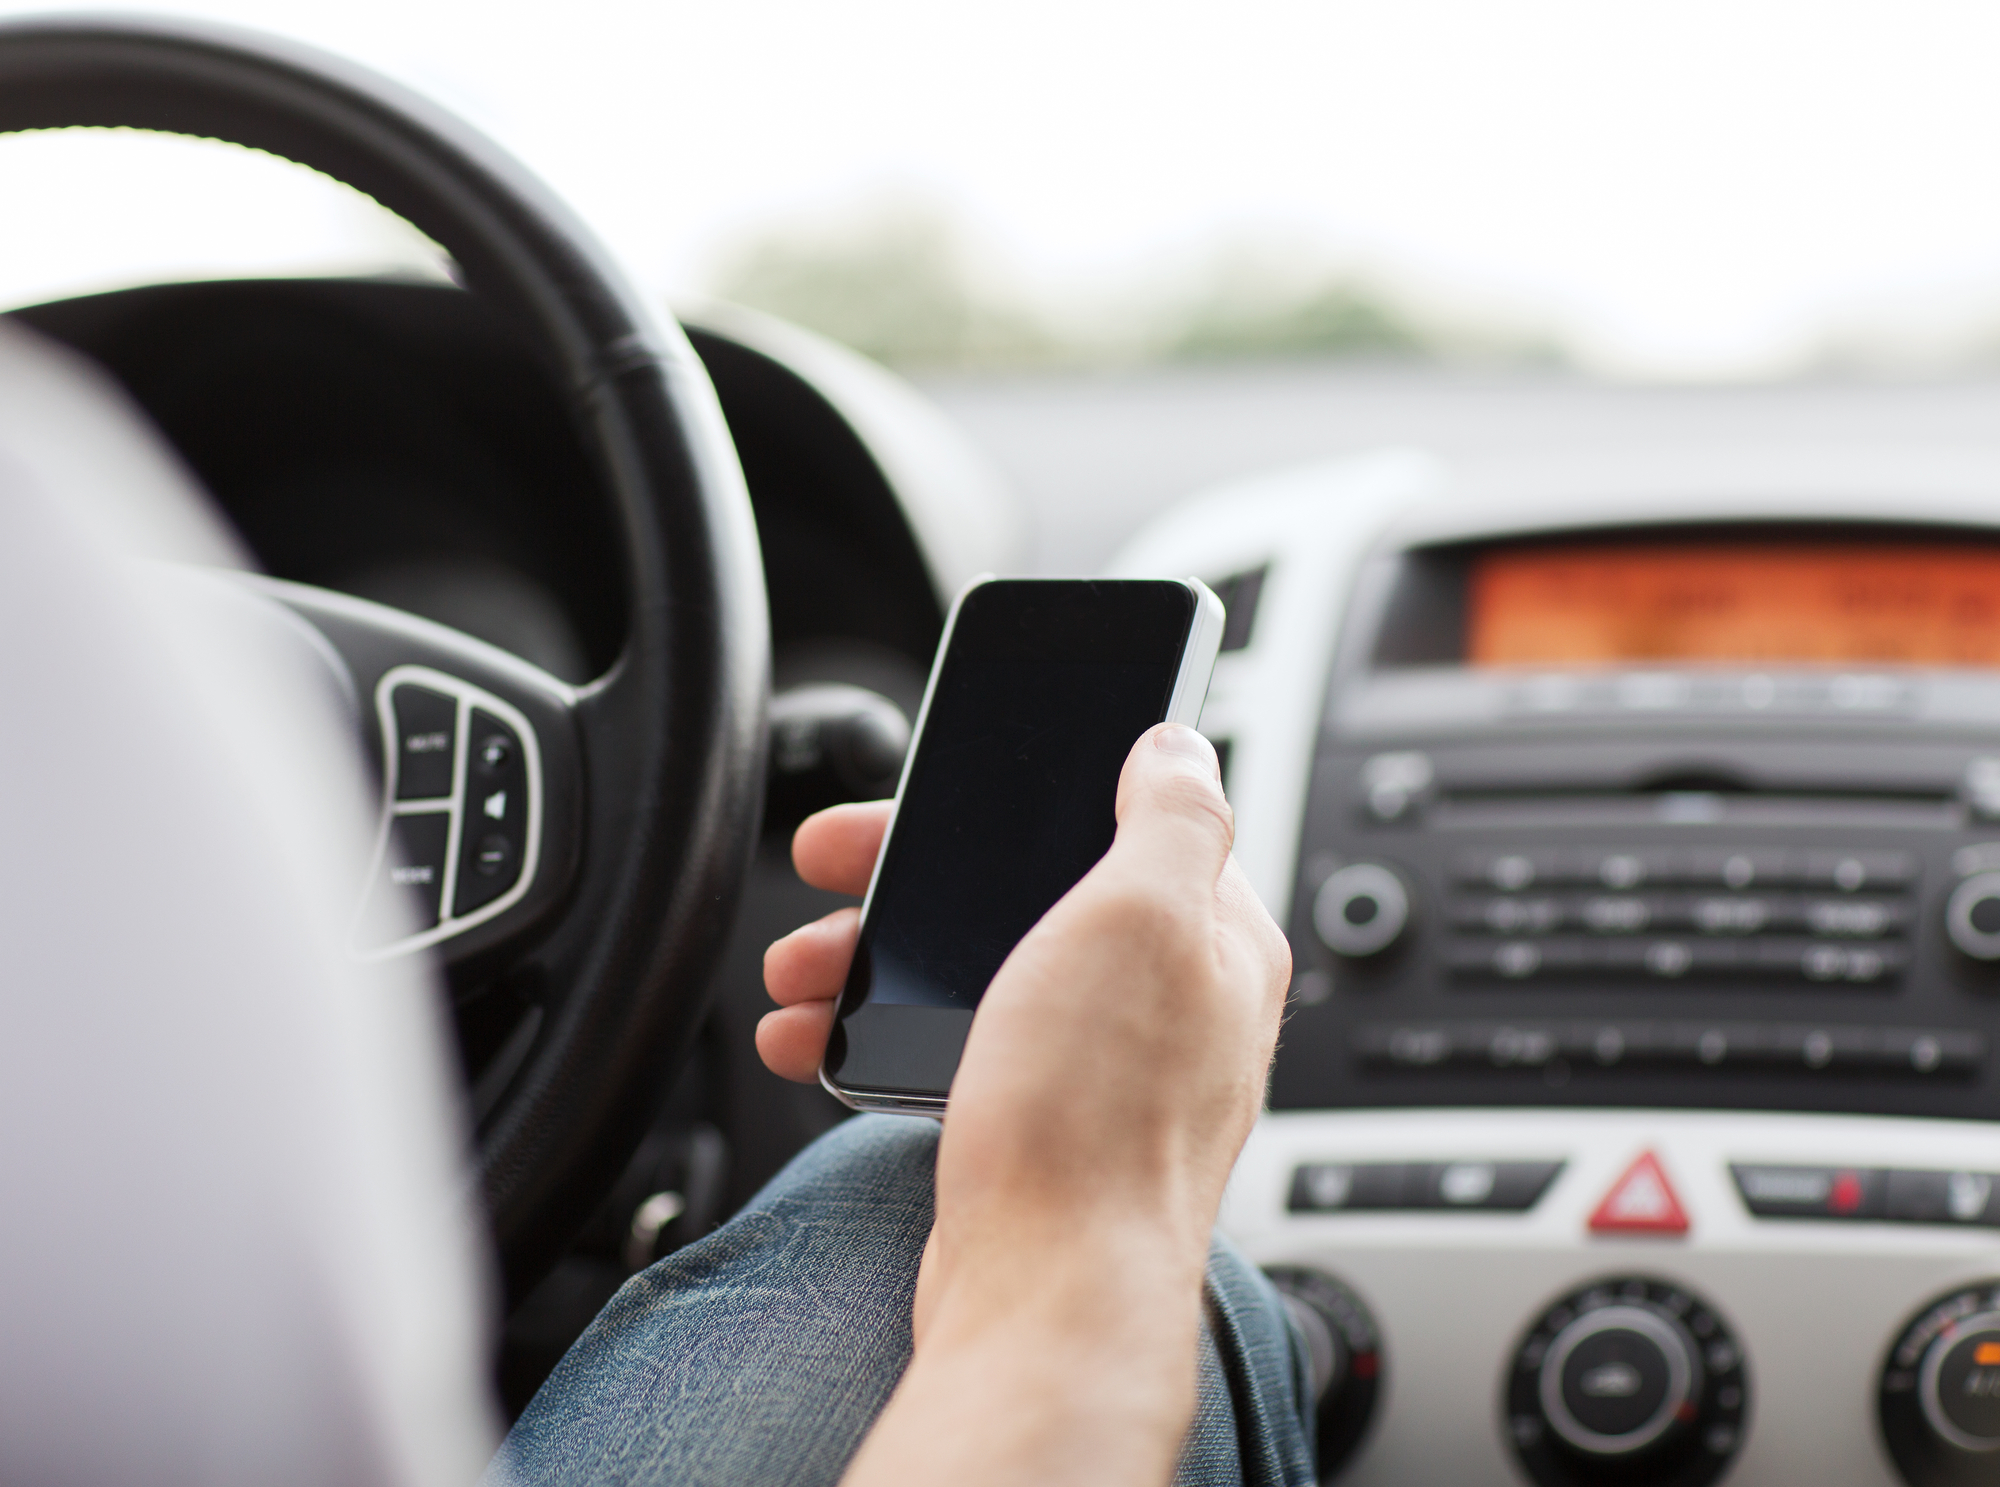 Distracted Driving Laws vary from state to state